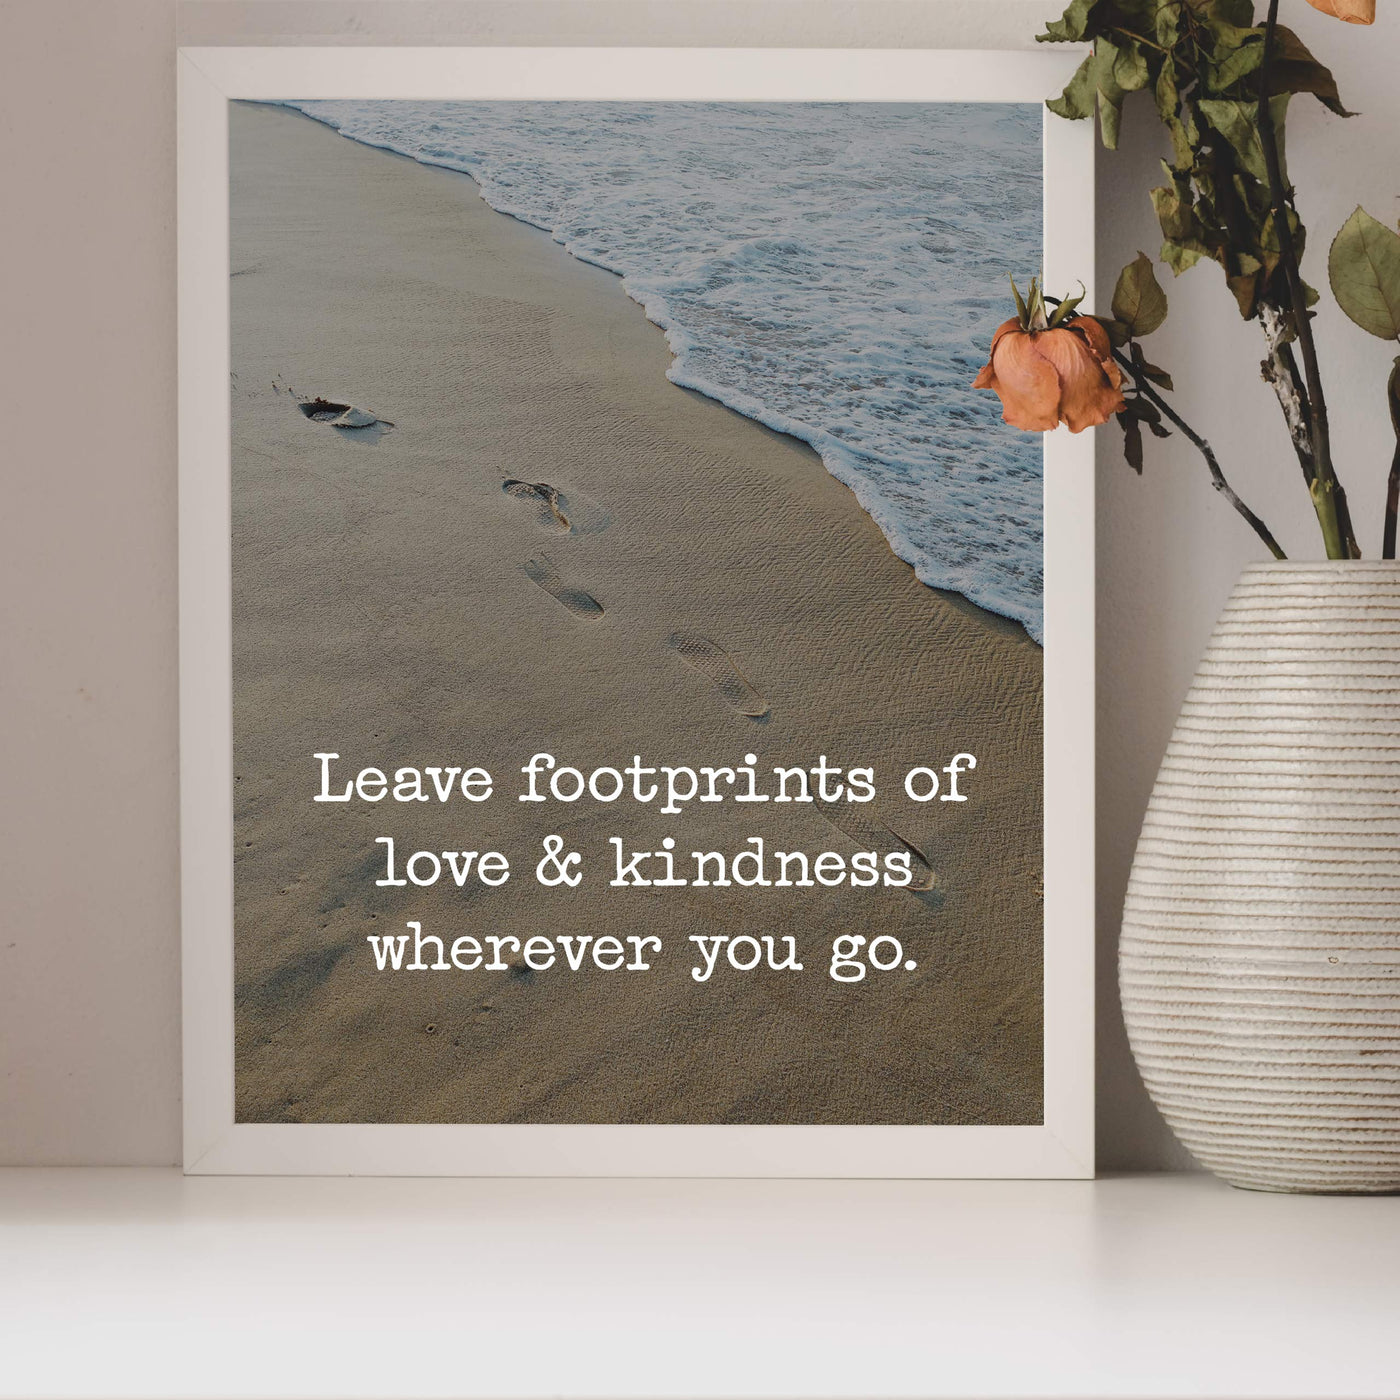 Leave Footprints of Love & Kindness Wherever You Go Beach Poster Print-8 x 10" Inspirational Quotes Wall Art-Ready to Frame. Home-Office-Ocean Themed Decor. Perfect Guest-Beach House Sign!